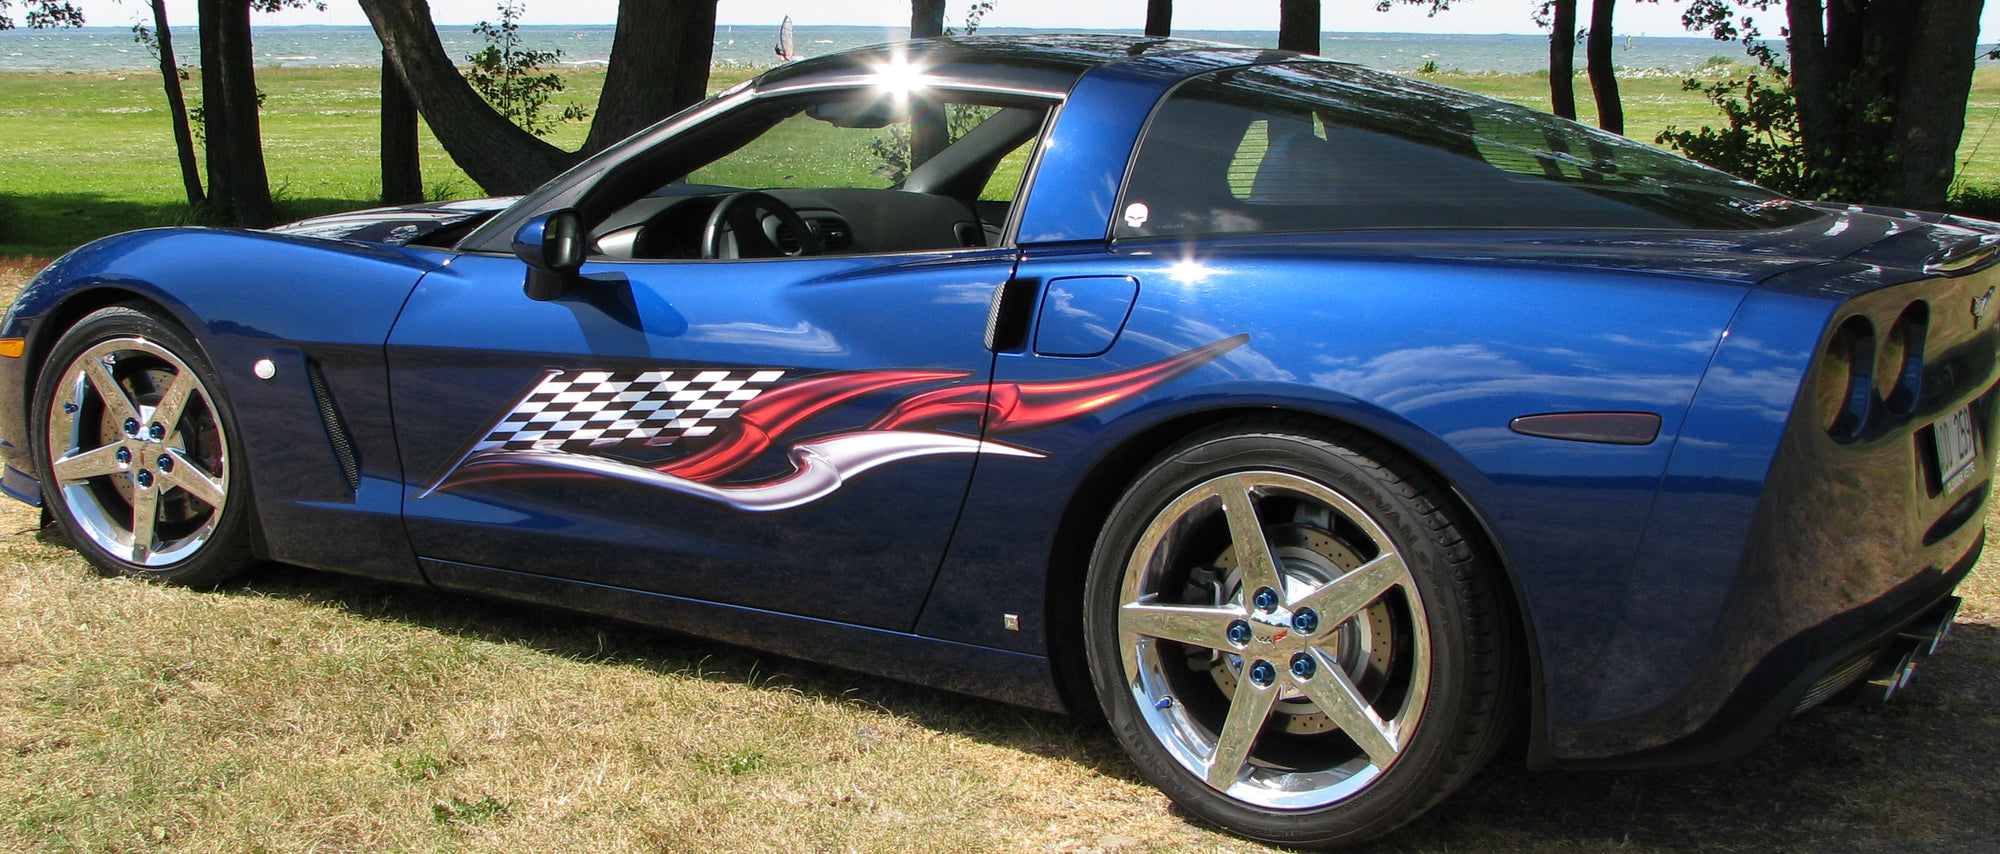 Checkered Flag Racing Wing Decal On A Corvette